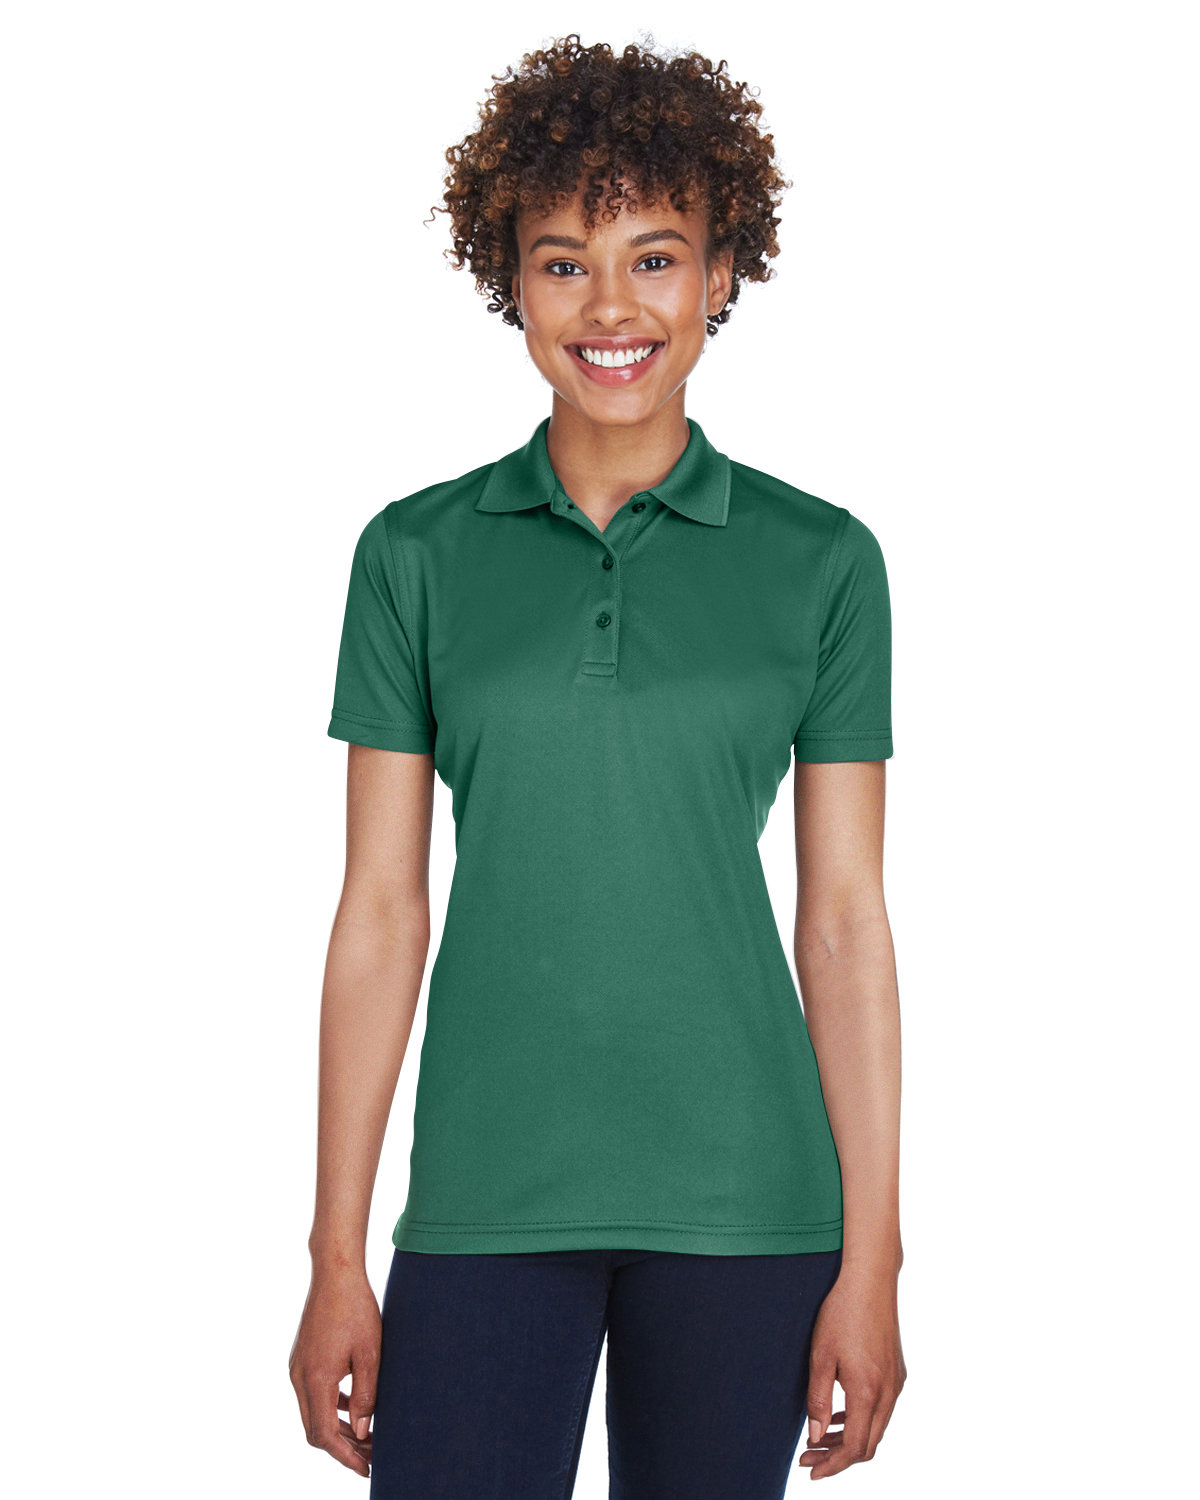 UltraClub Ladies' Cool & Dry Mesh Piqué Polo FOREST GREEN 